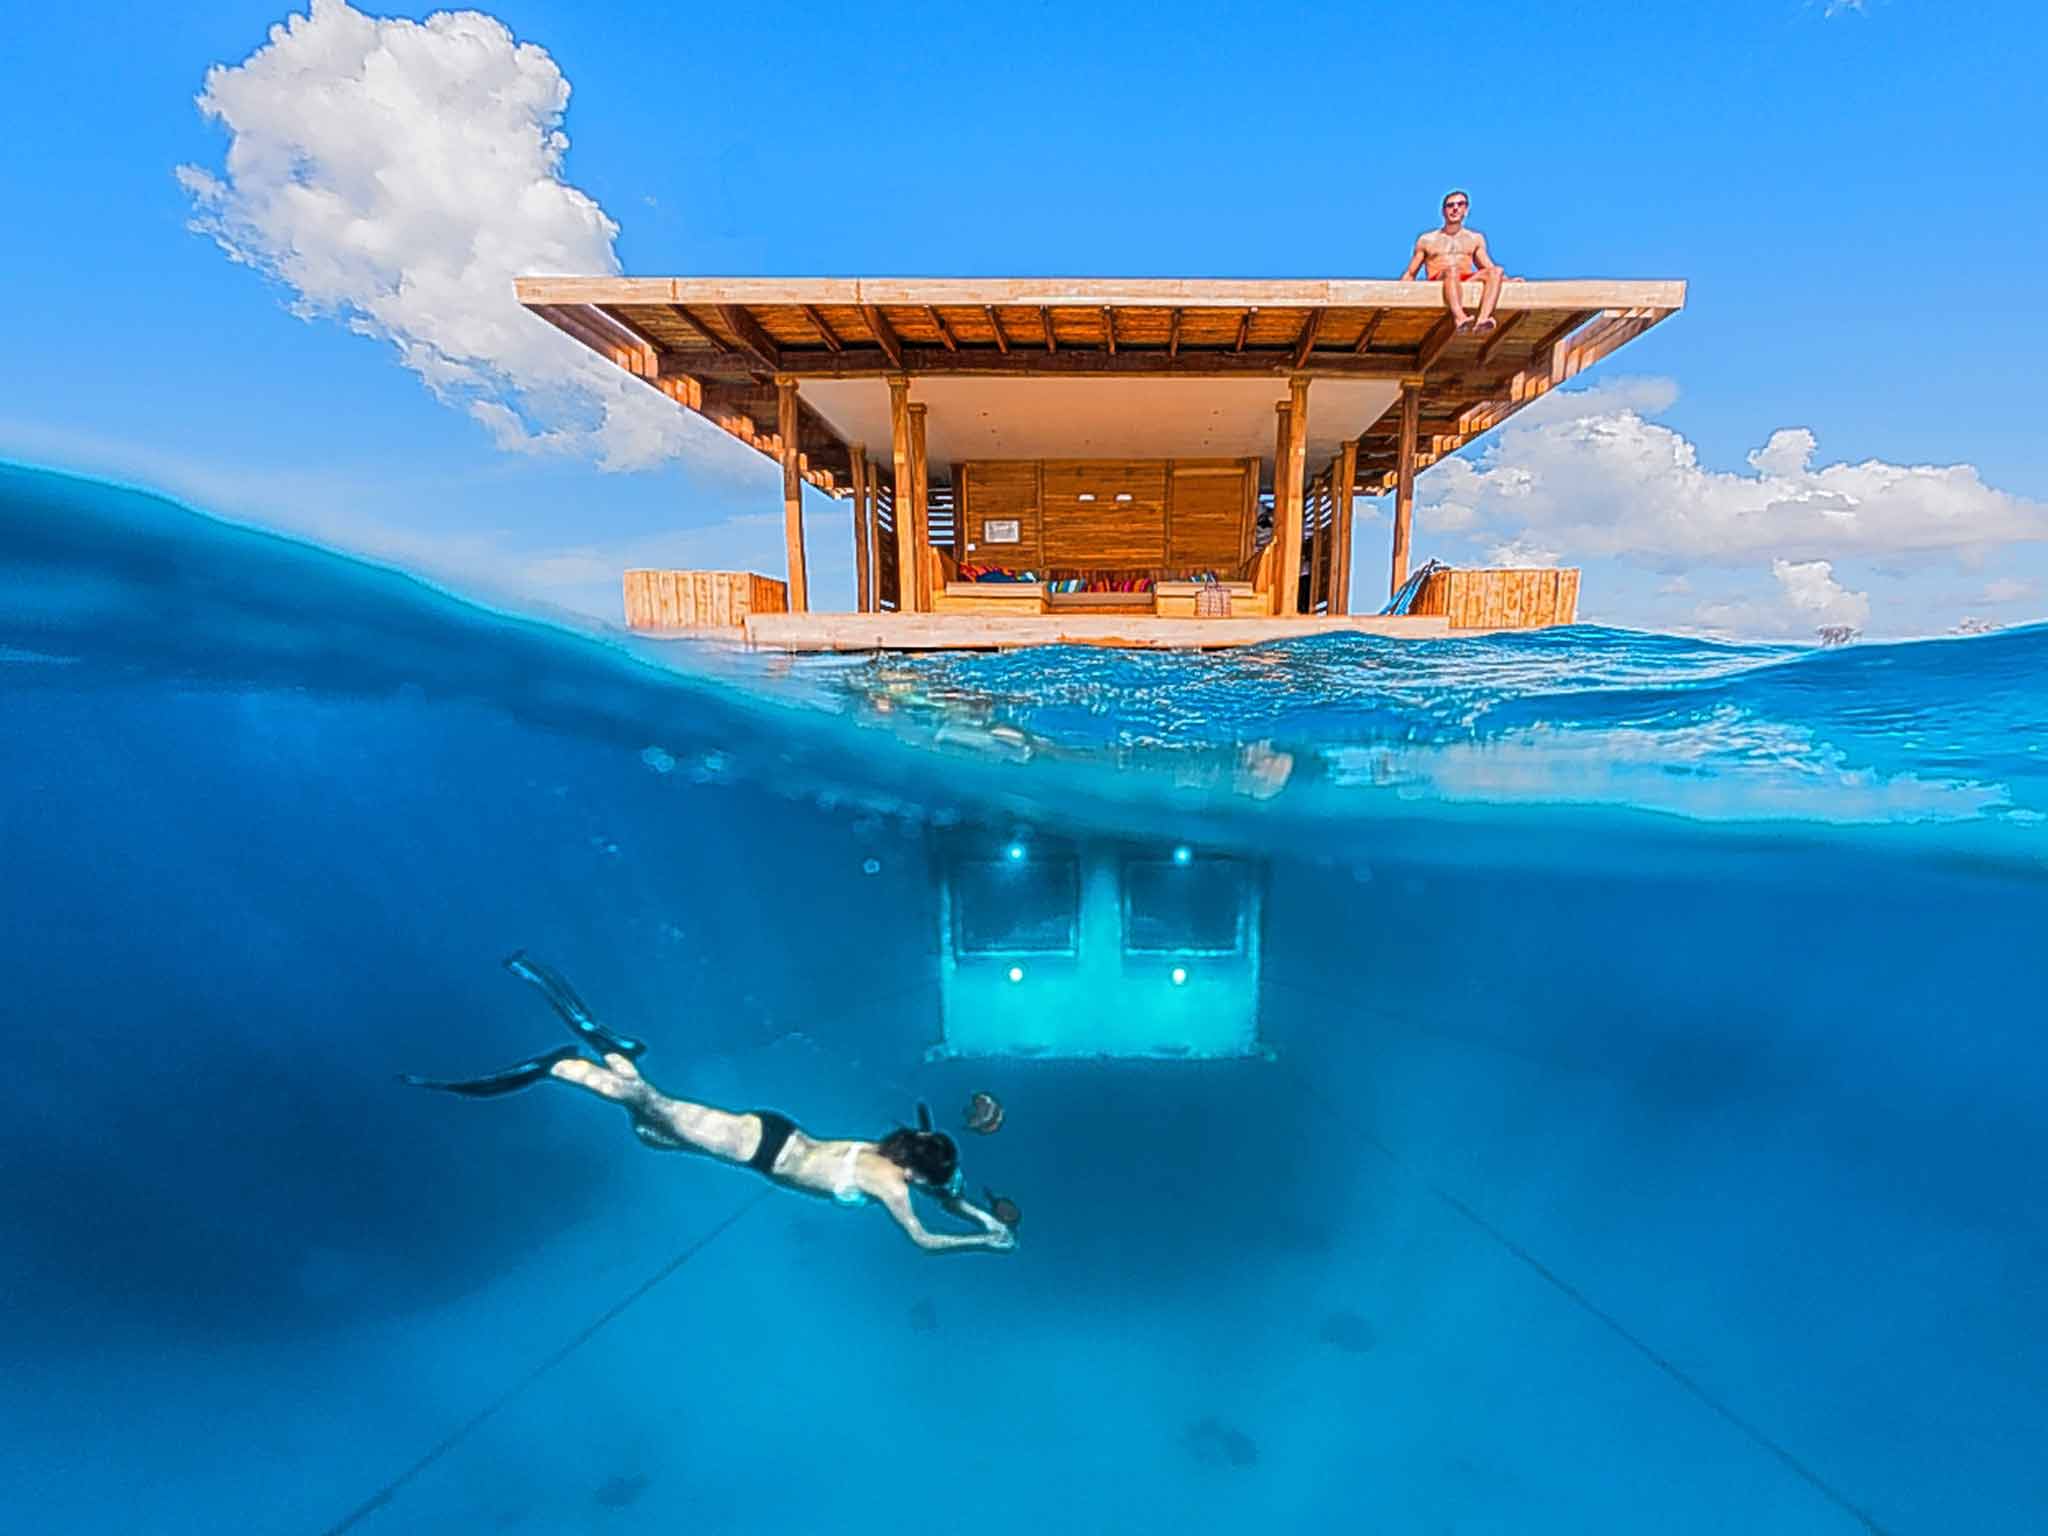 The Manta Resort allows a unique view of underwater life